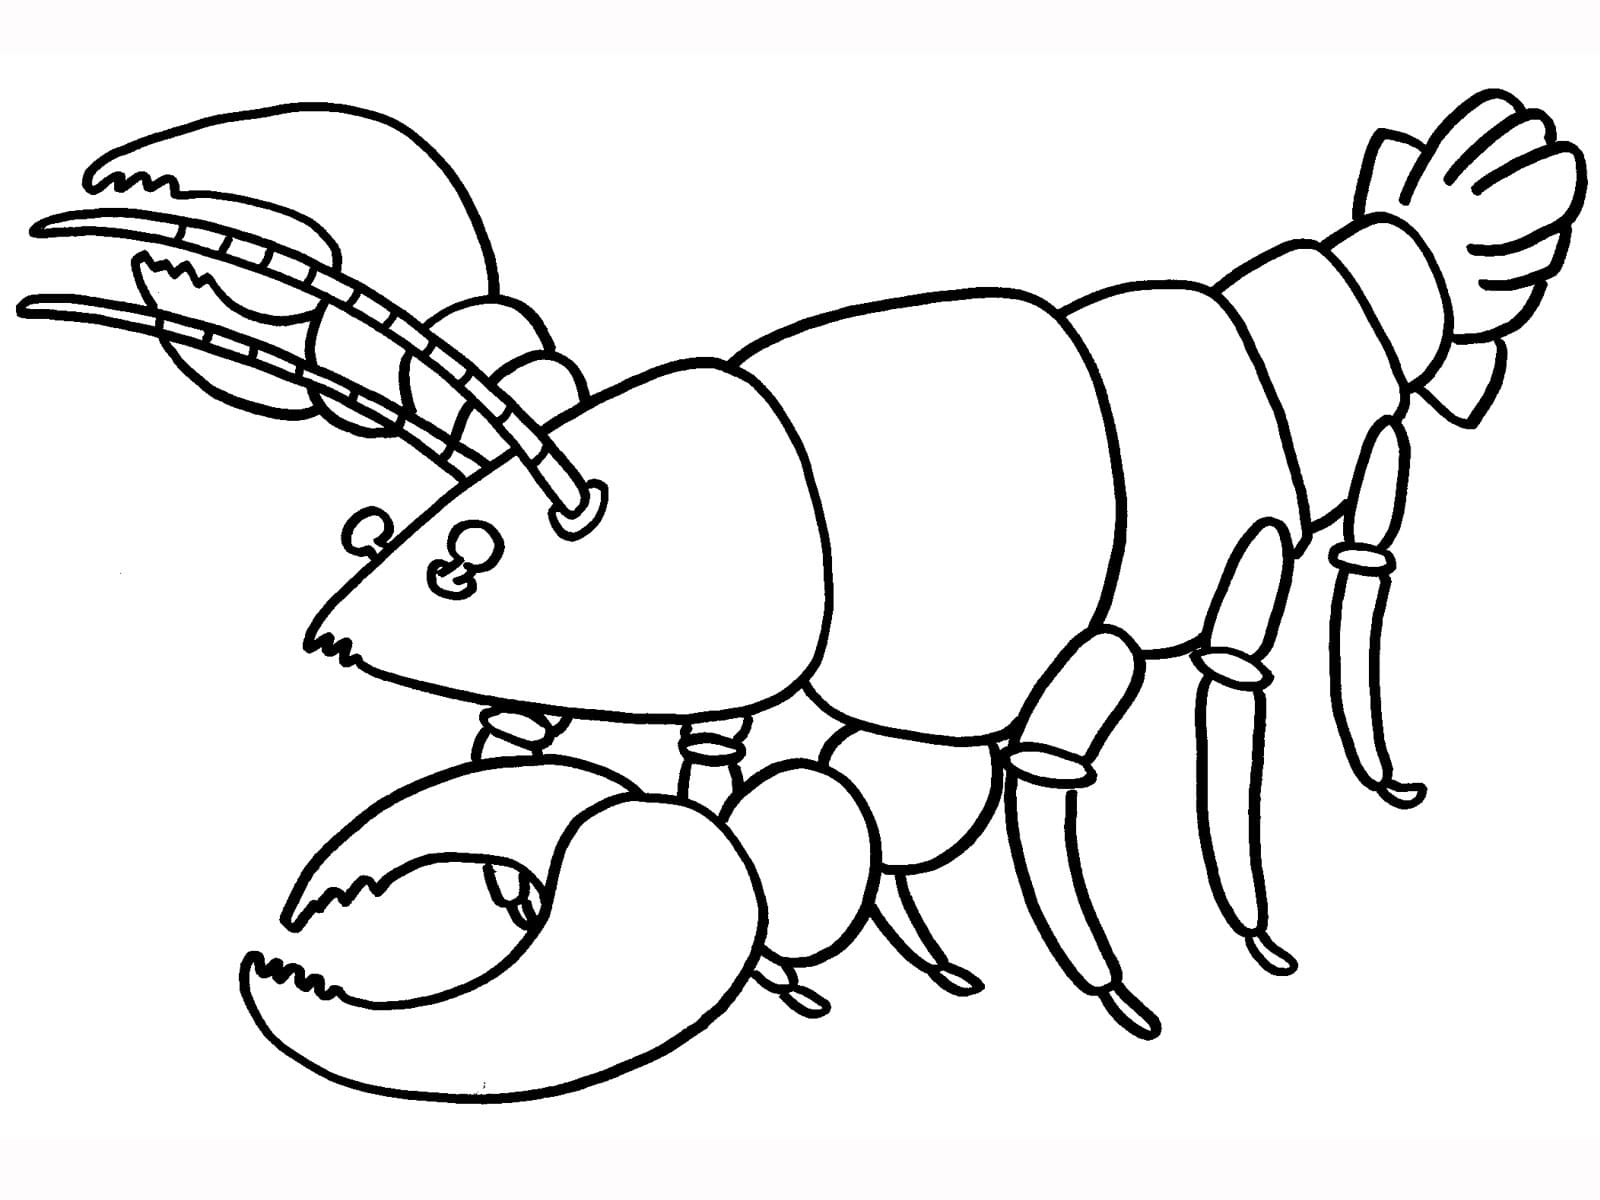 Cartoon Lobster Image Coloring Page